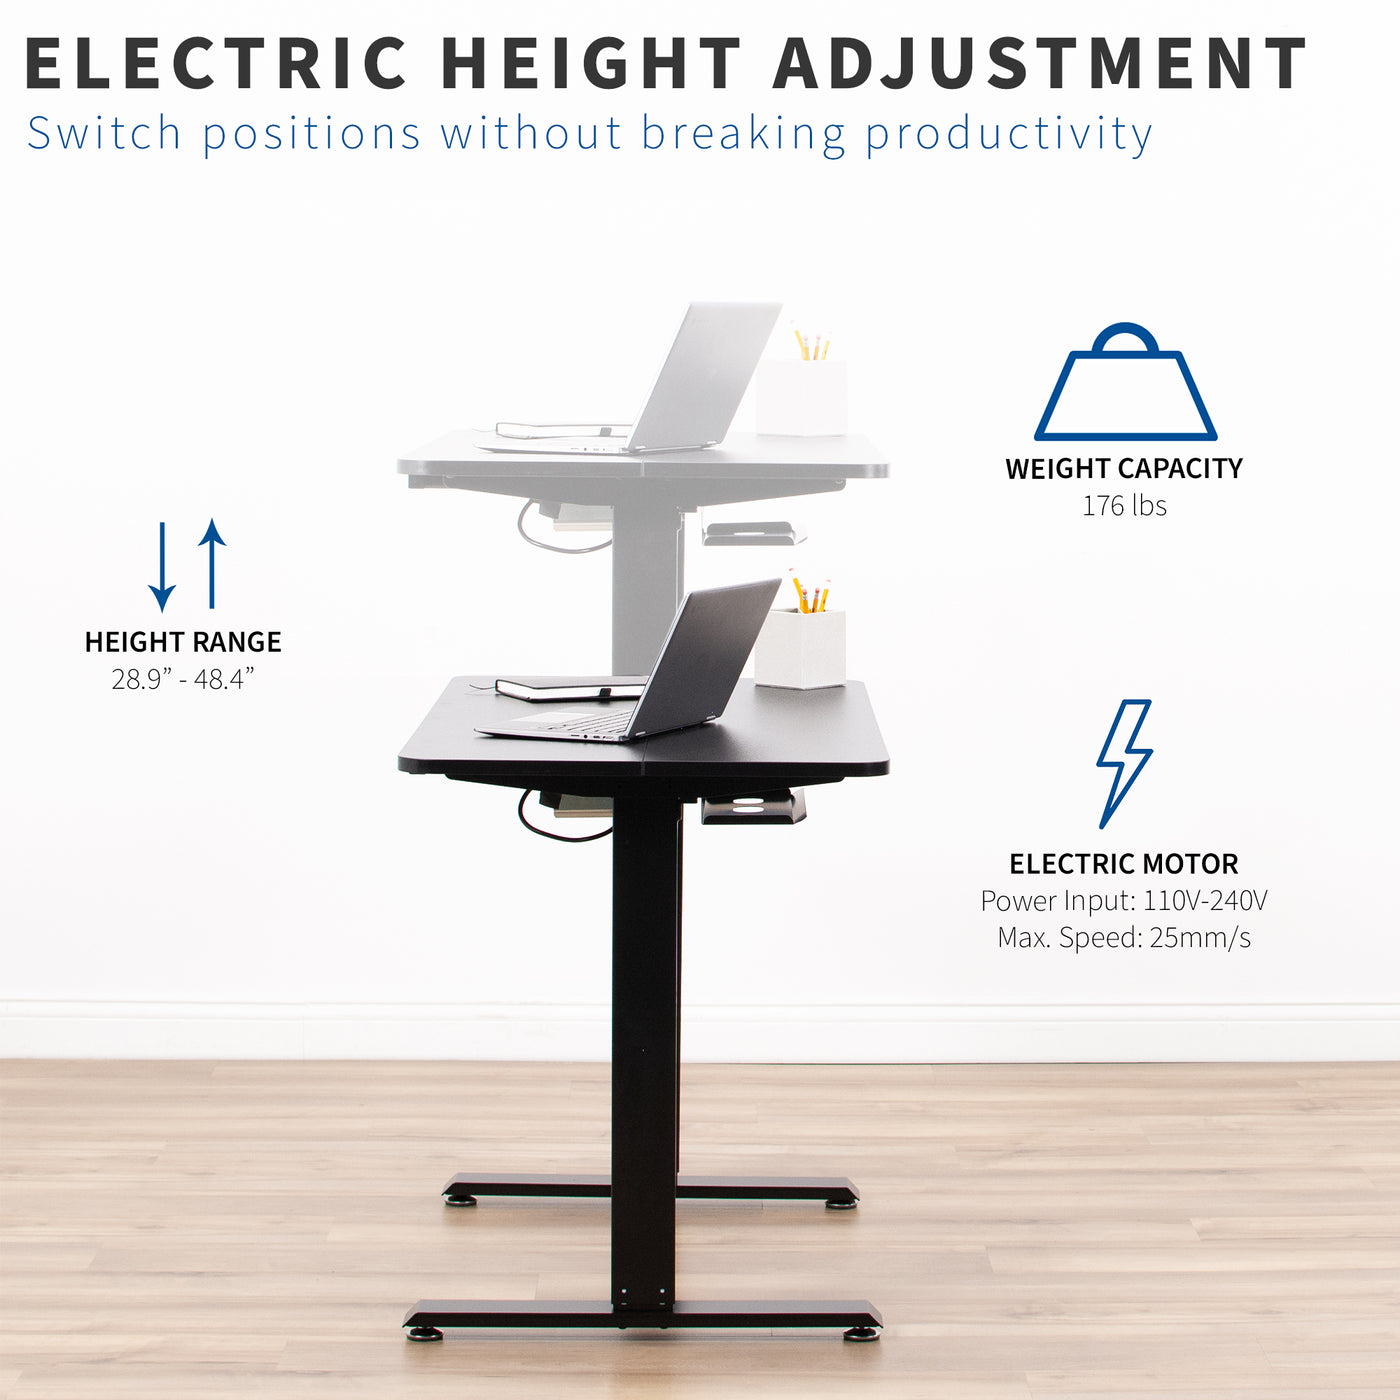 Electric height adjustment to swiftly move from sitting to standing.